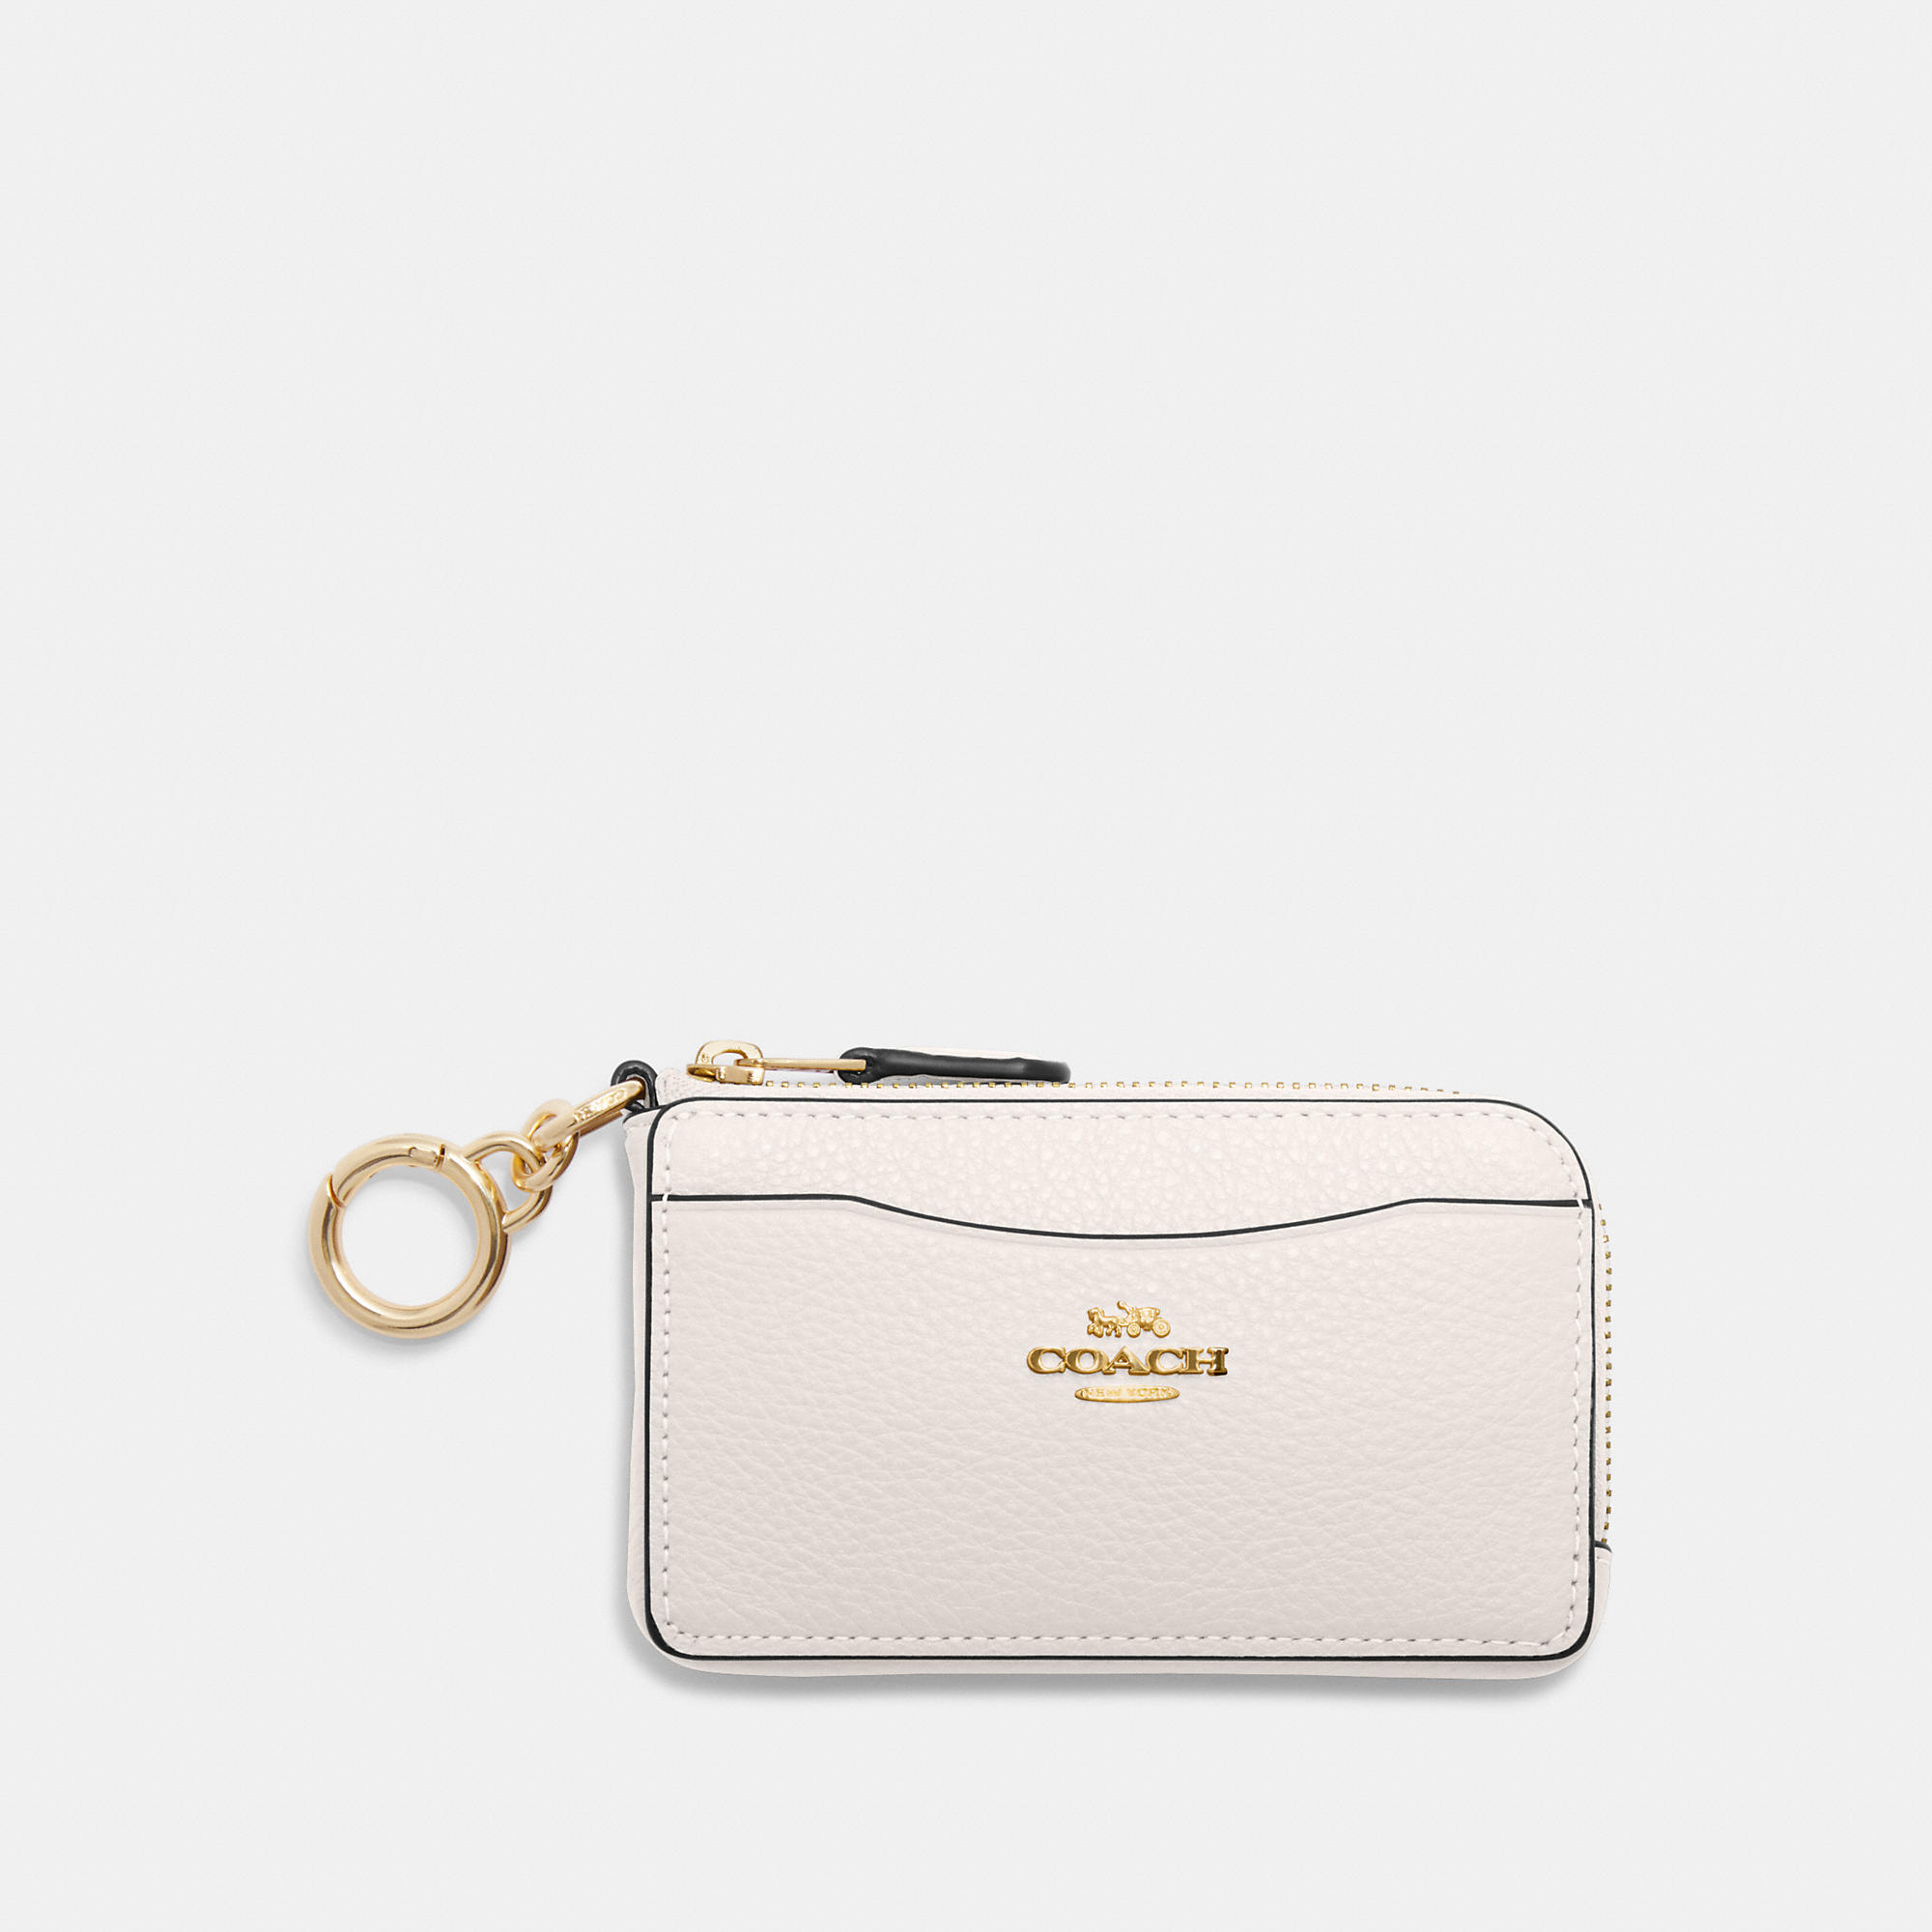 Coach Outlet Multifunction Card Case - White